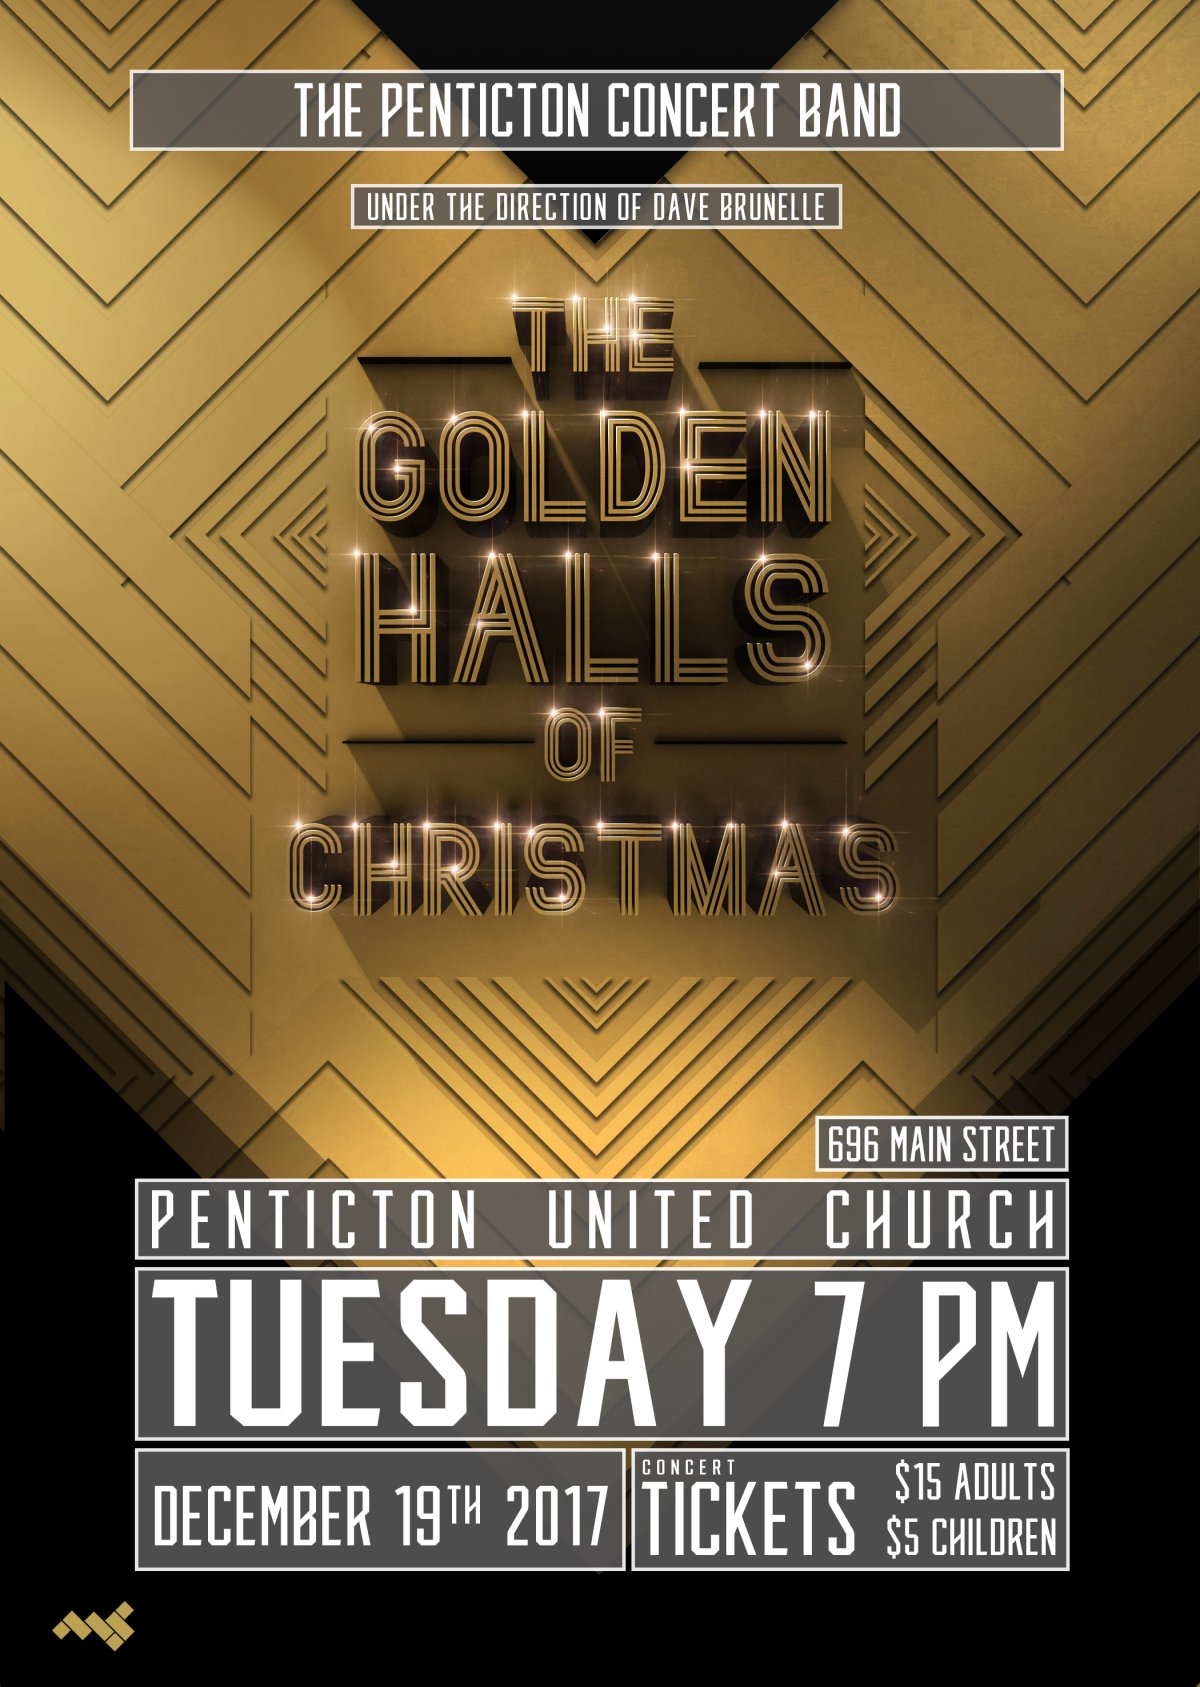 The Golden Halls of Christmas - image